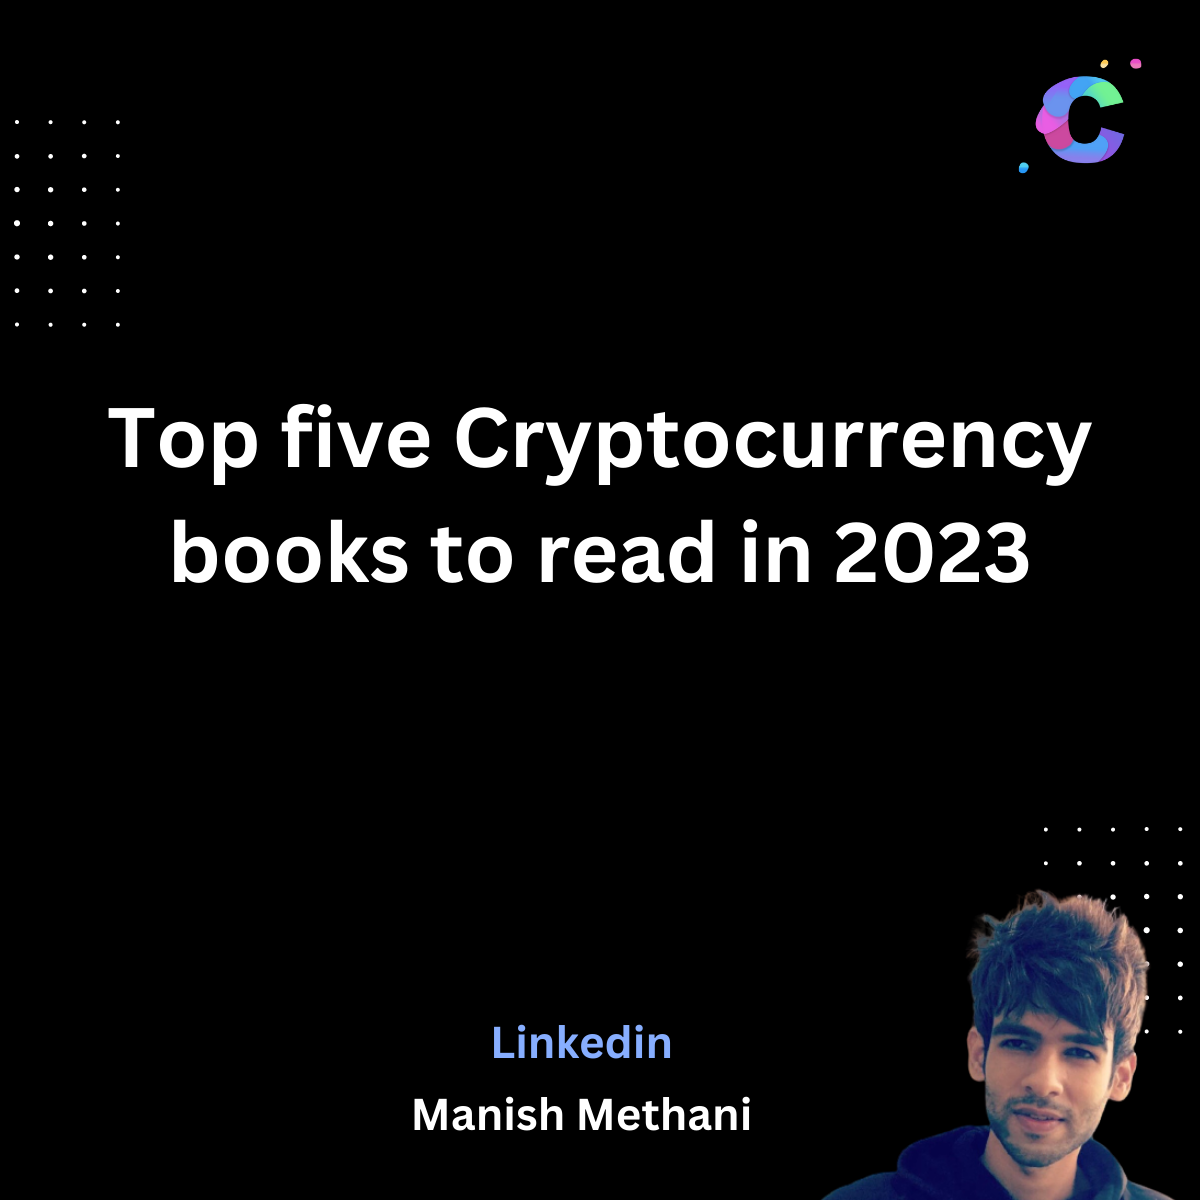 Top 5 Cryptocurrency Books to Read in 2023